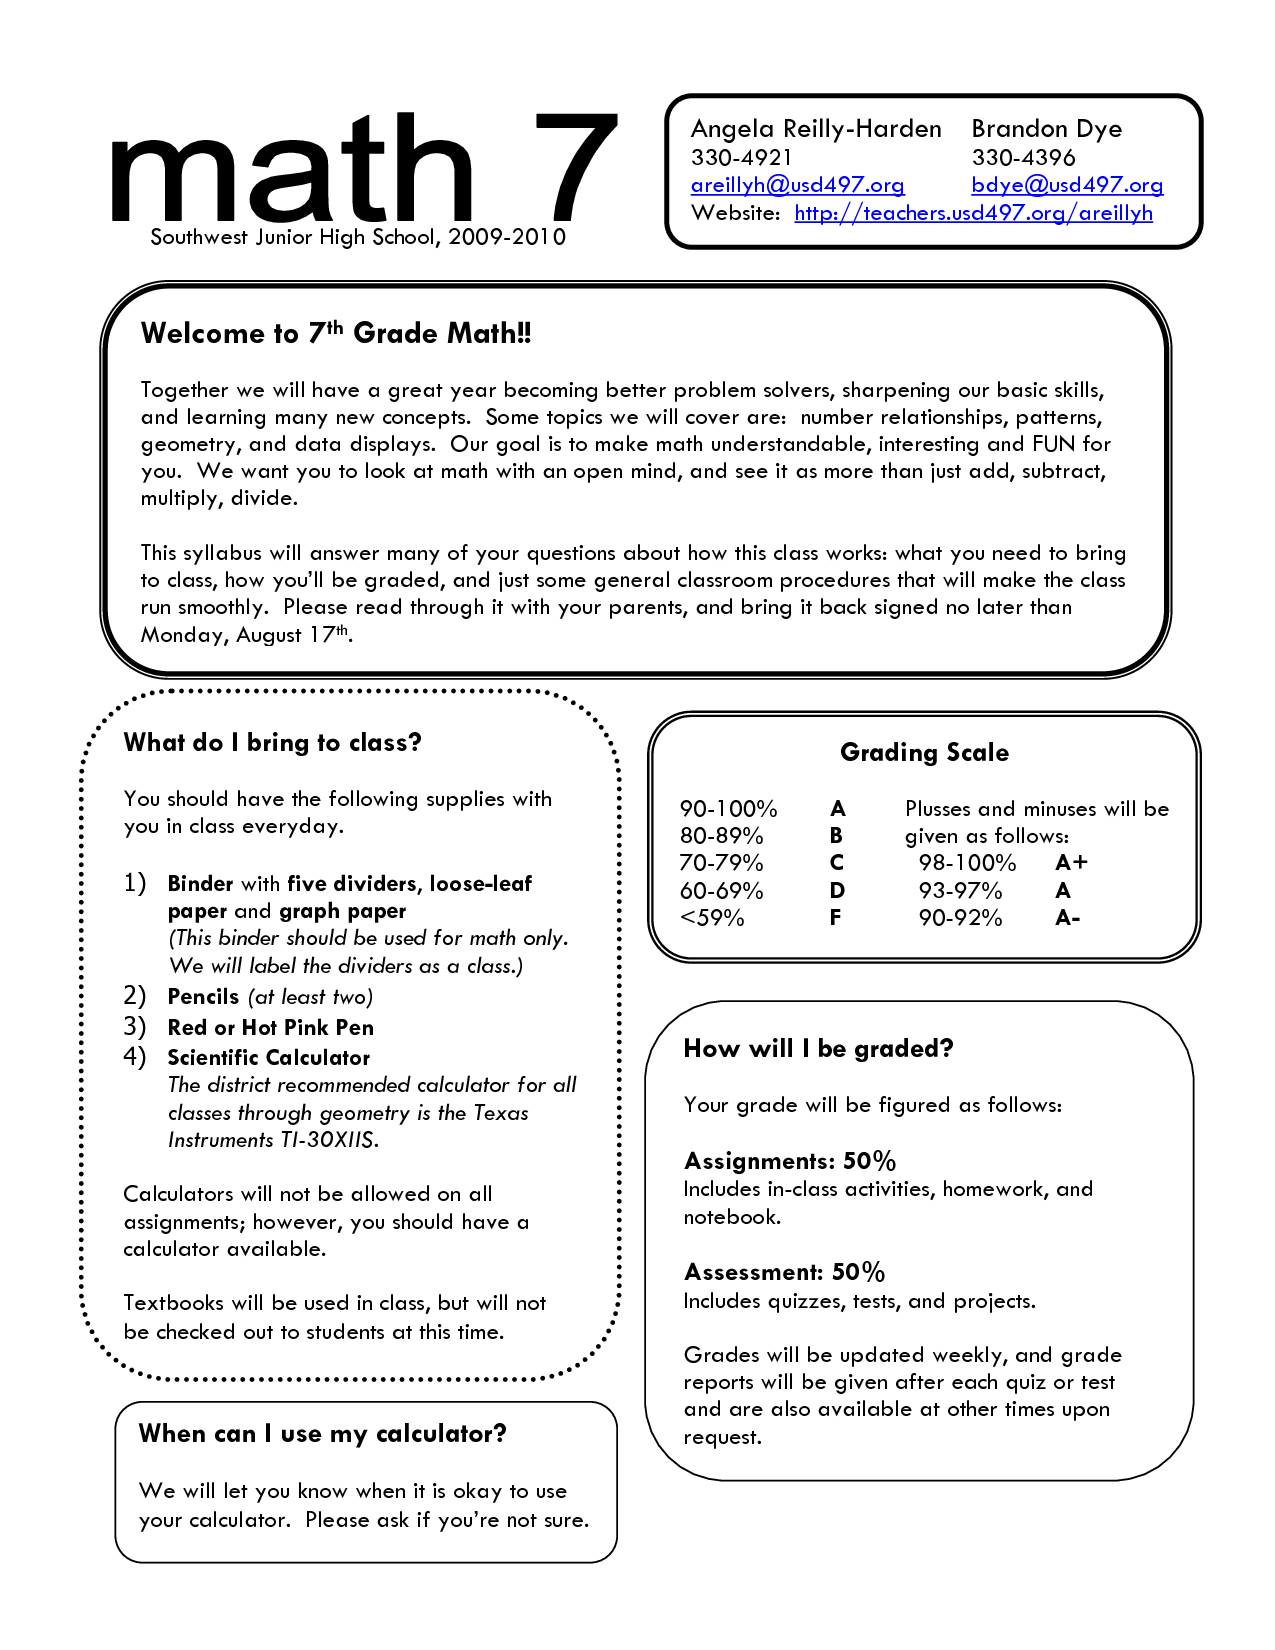 17-best-images-of-inkheart-the-book-worksheets-for-7th-grade-literature-7th-grade-english